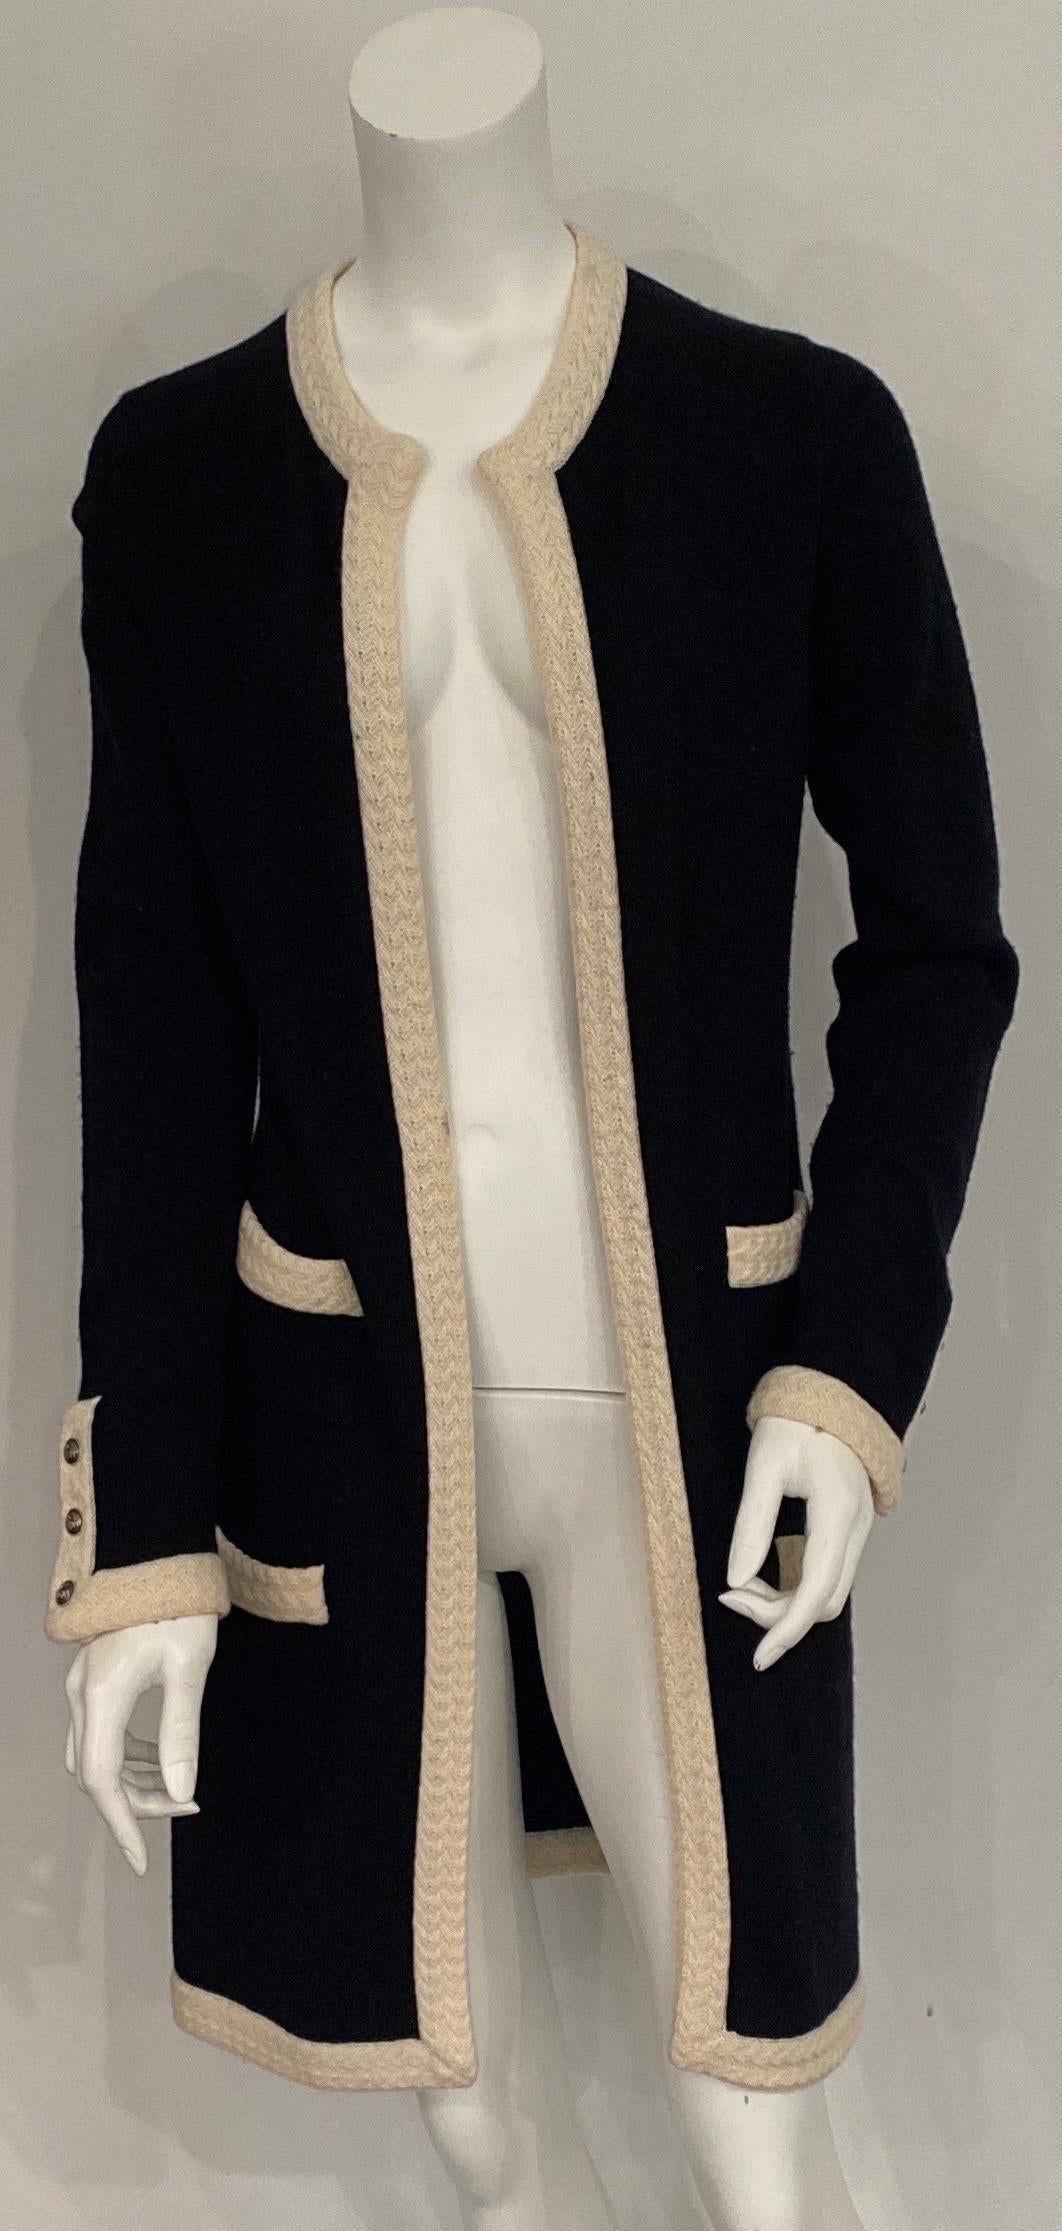 Chanel Black and Cream Cashmere Coat -Size 40- 2004A This Chanel Black Cashmere 3/4 length coat has cream color 1.25